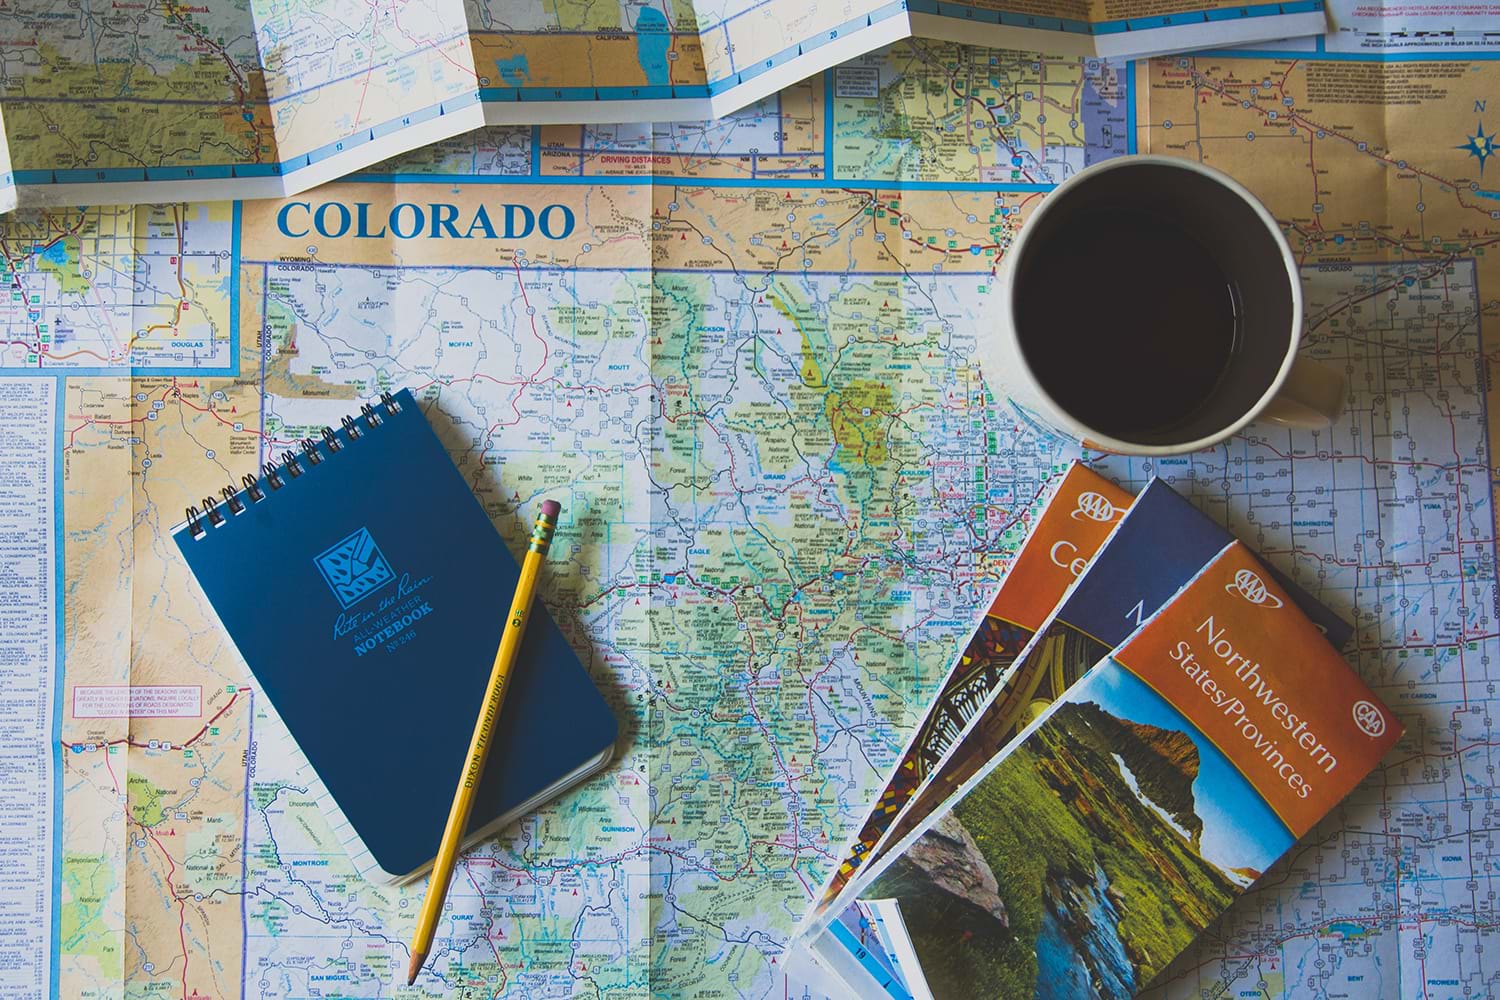 Map of Colorado and tourism pamphlets